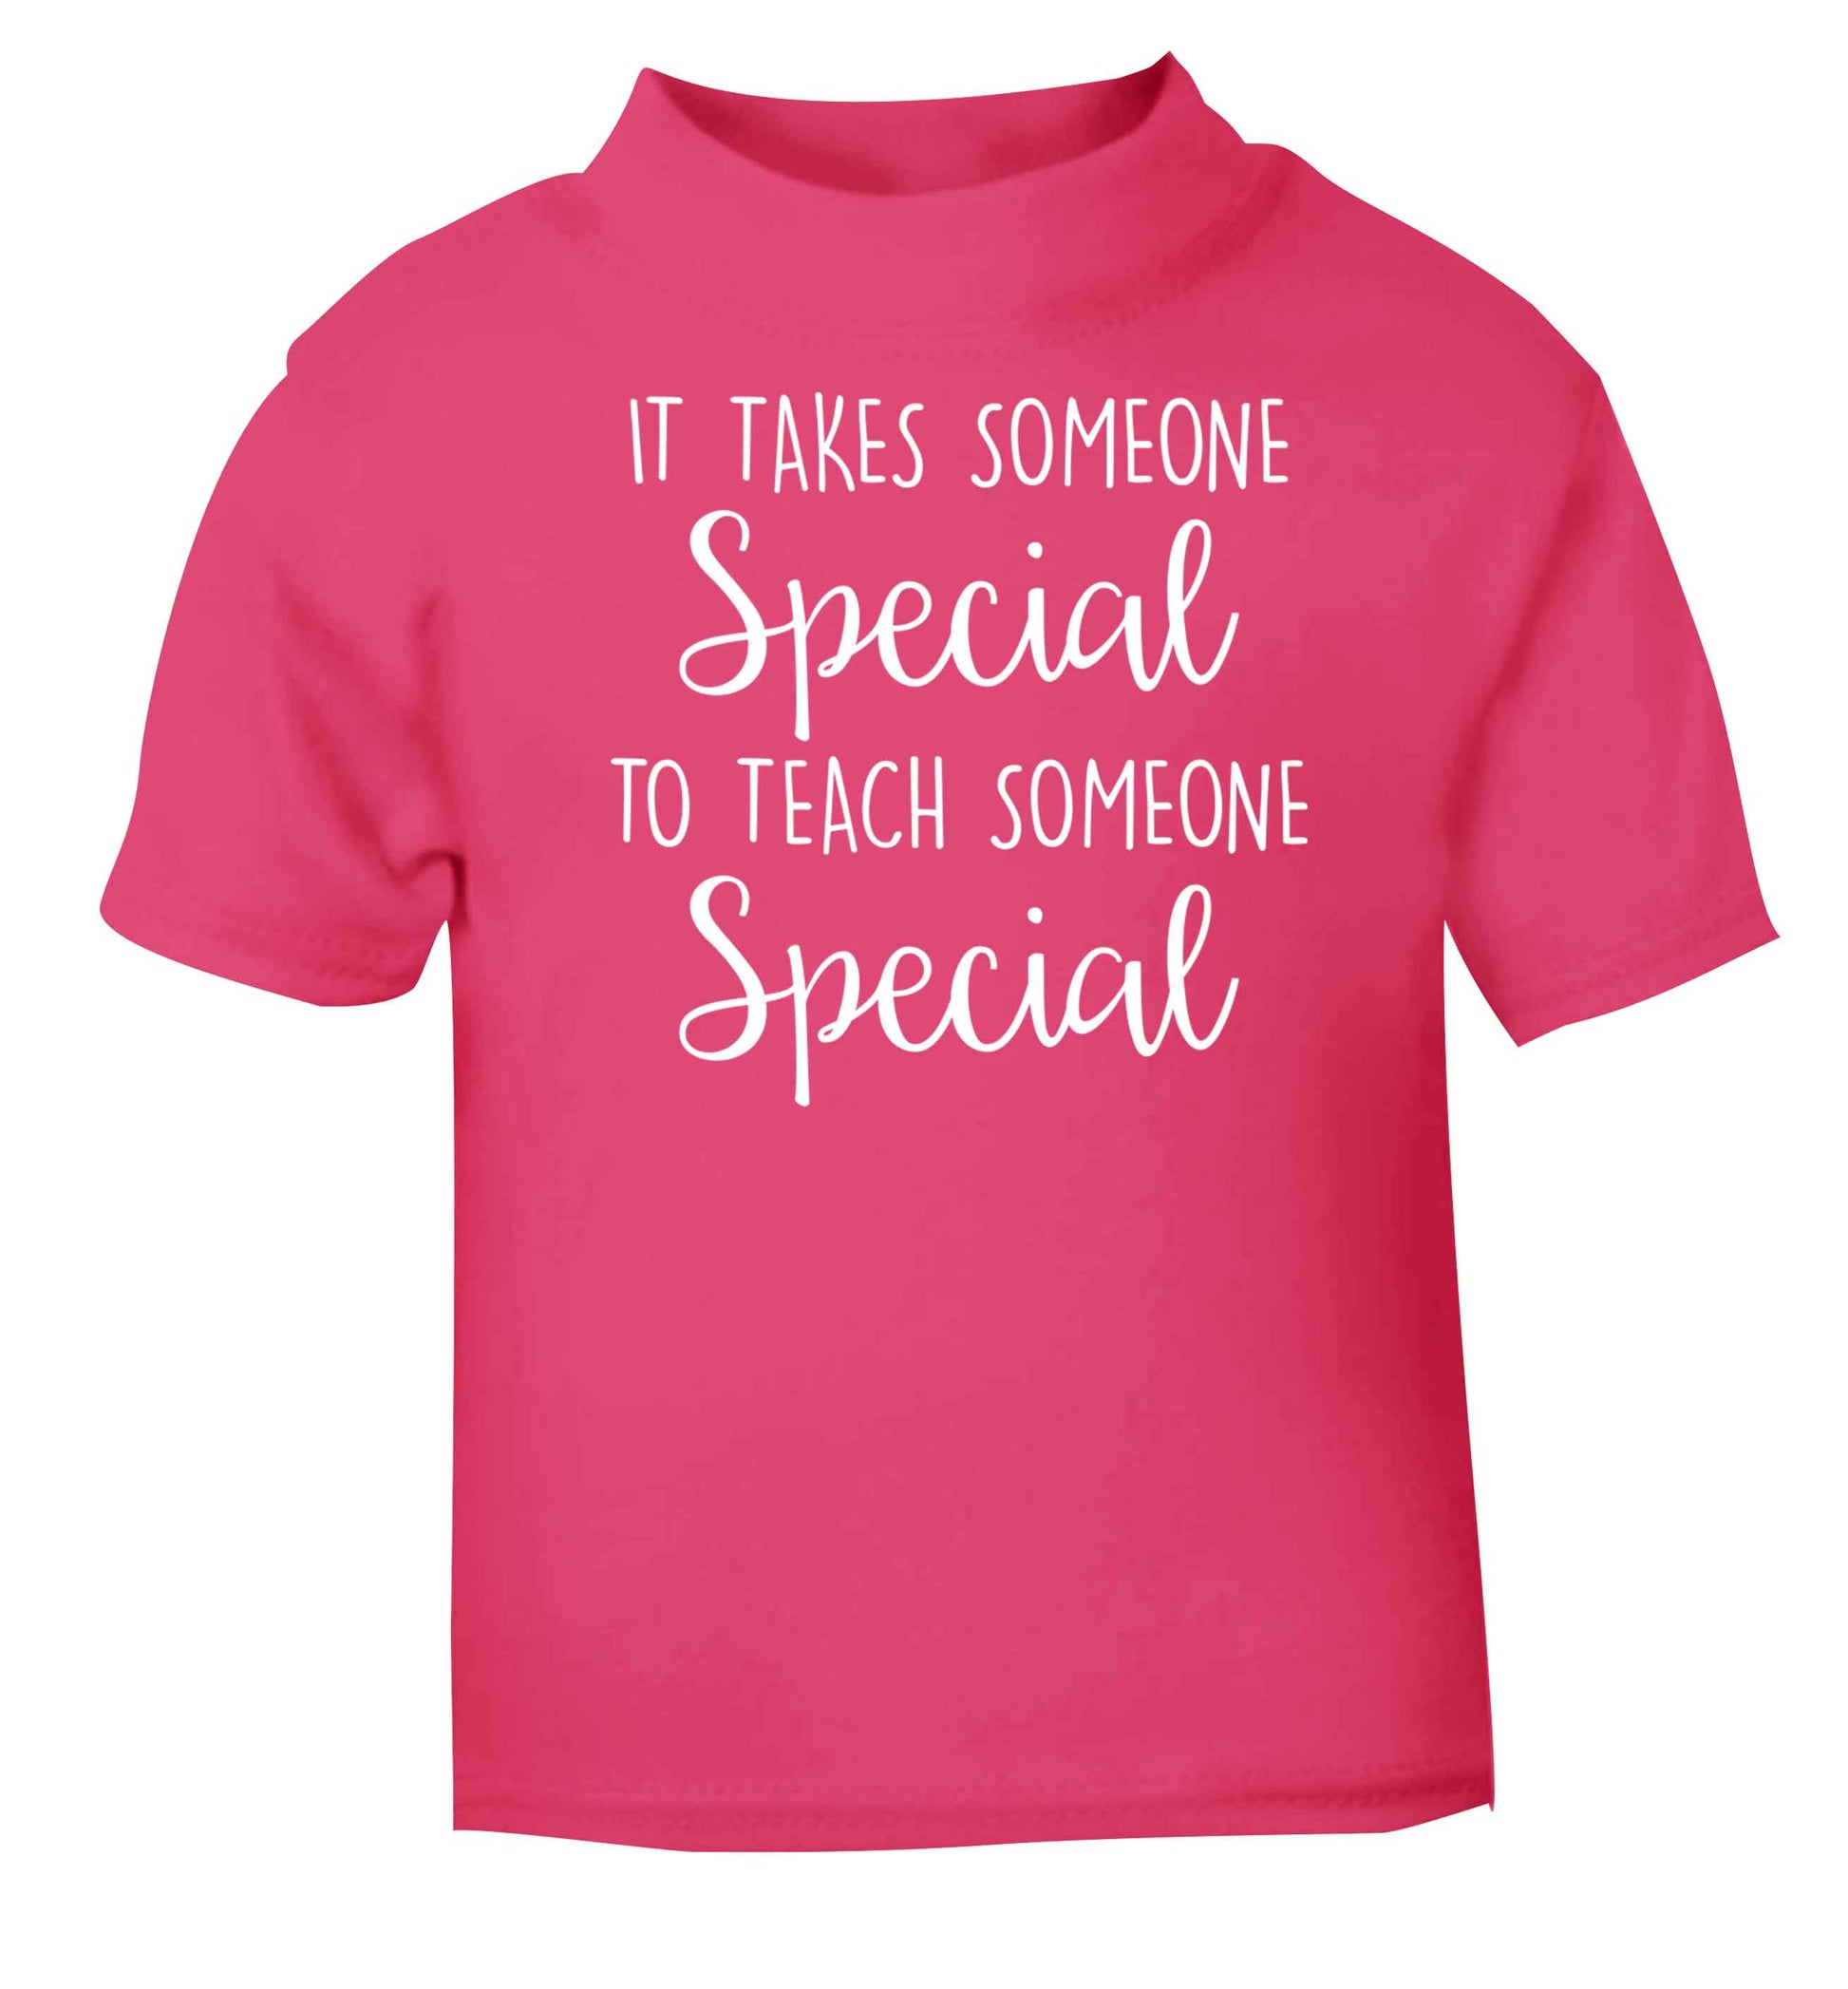 It takes someone special to teach someone special pink baby toddler Tshirt 2 Years